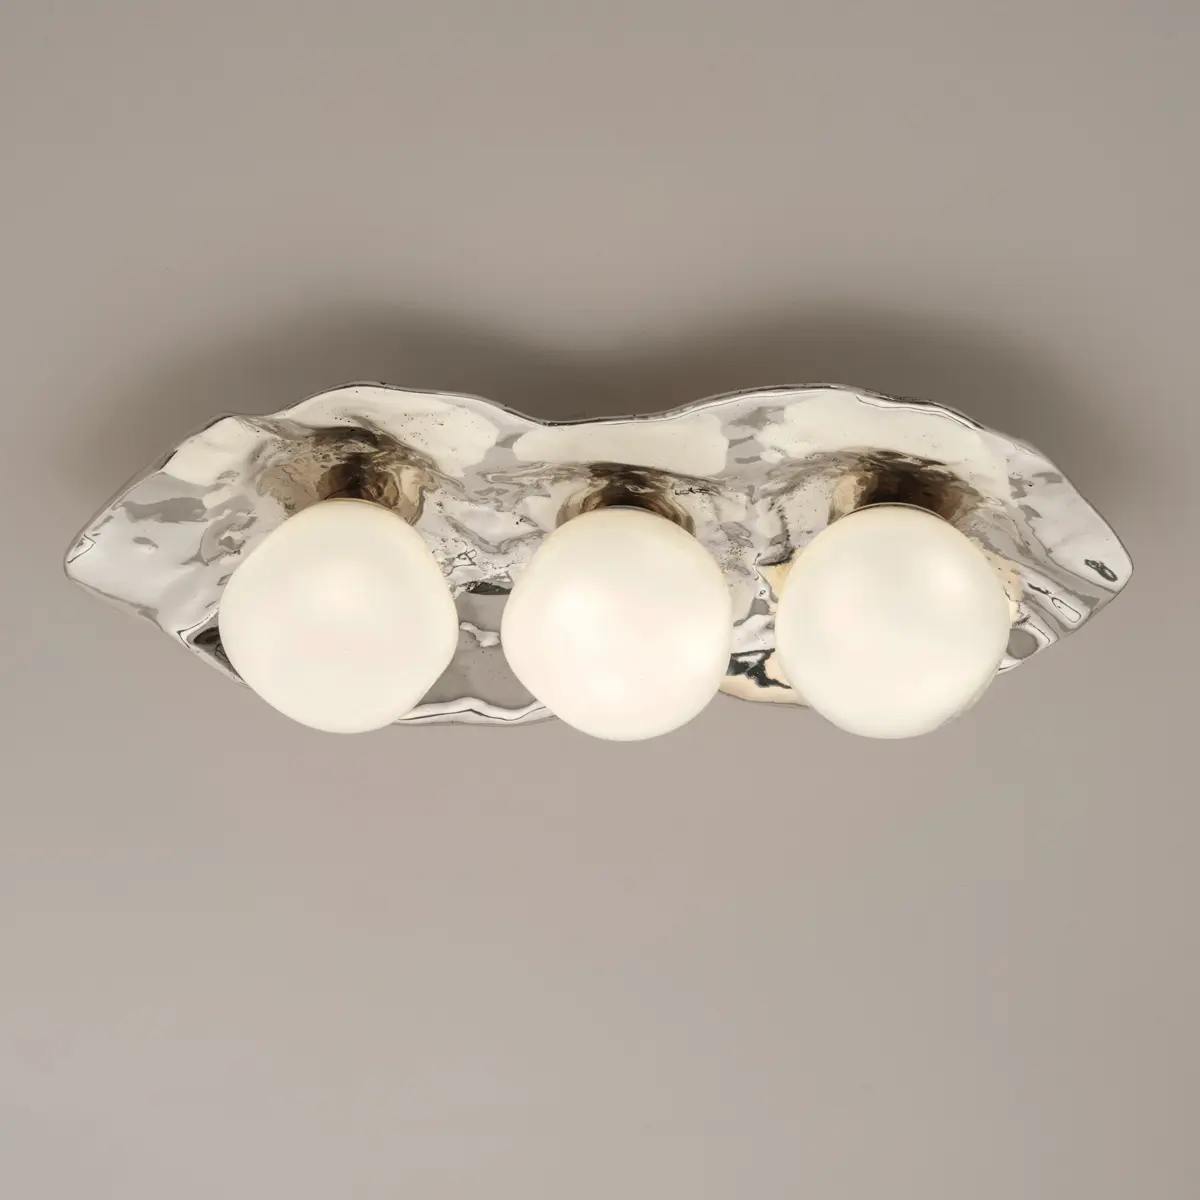 Shell ceiling light by Gaspare Asaro